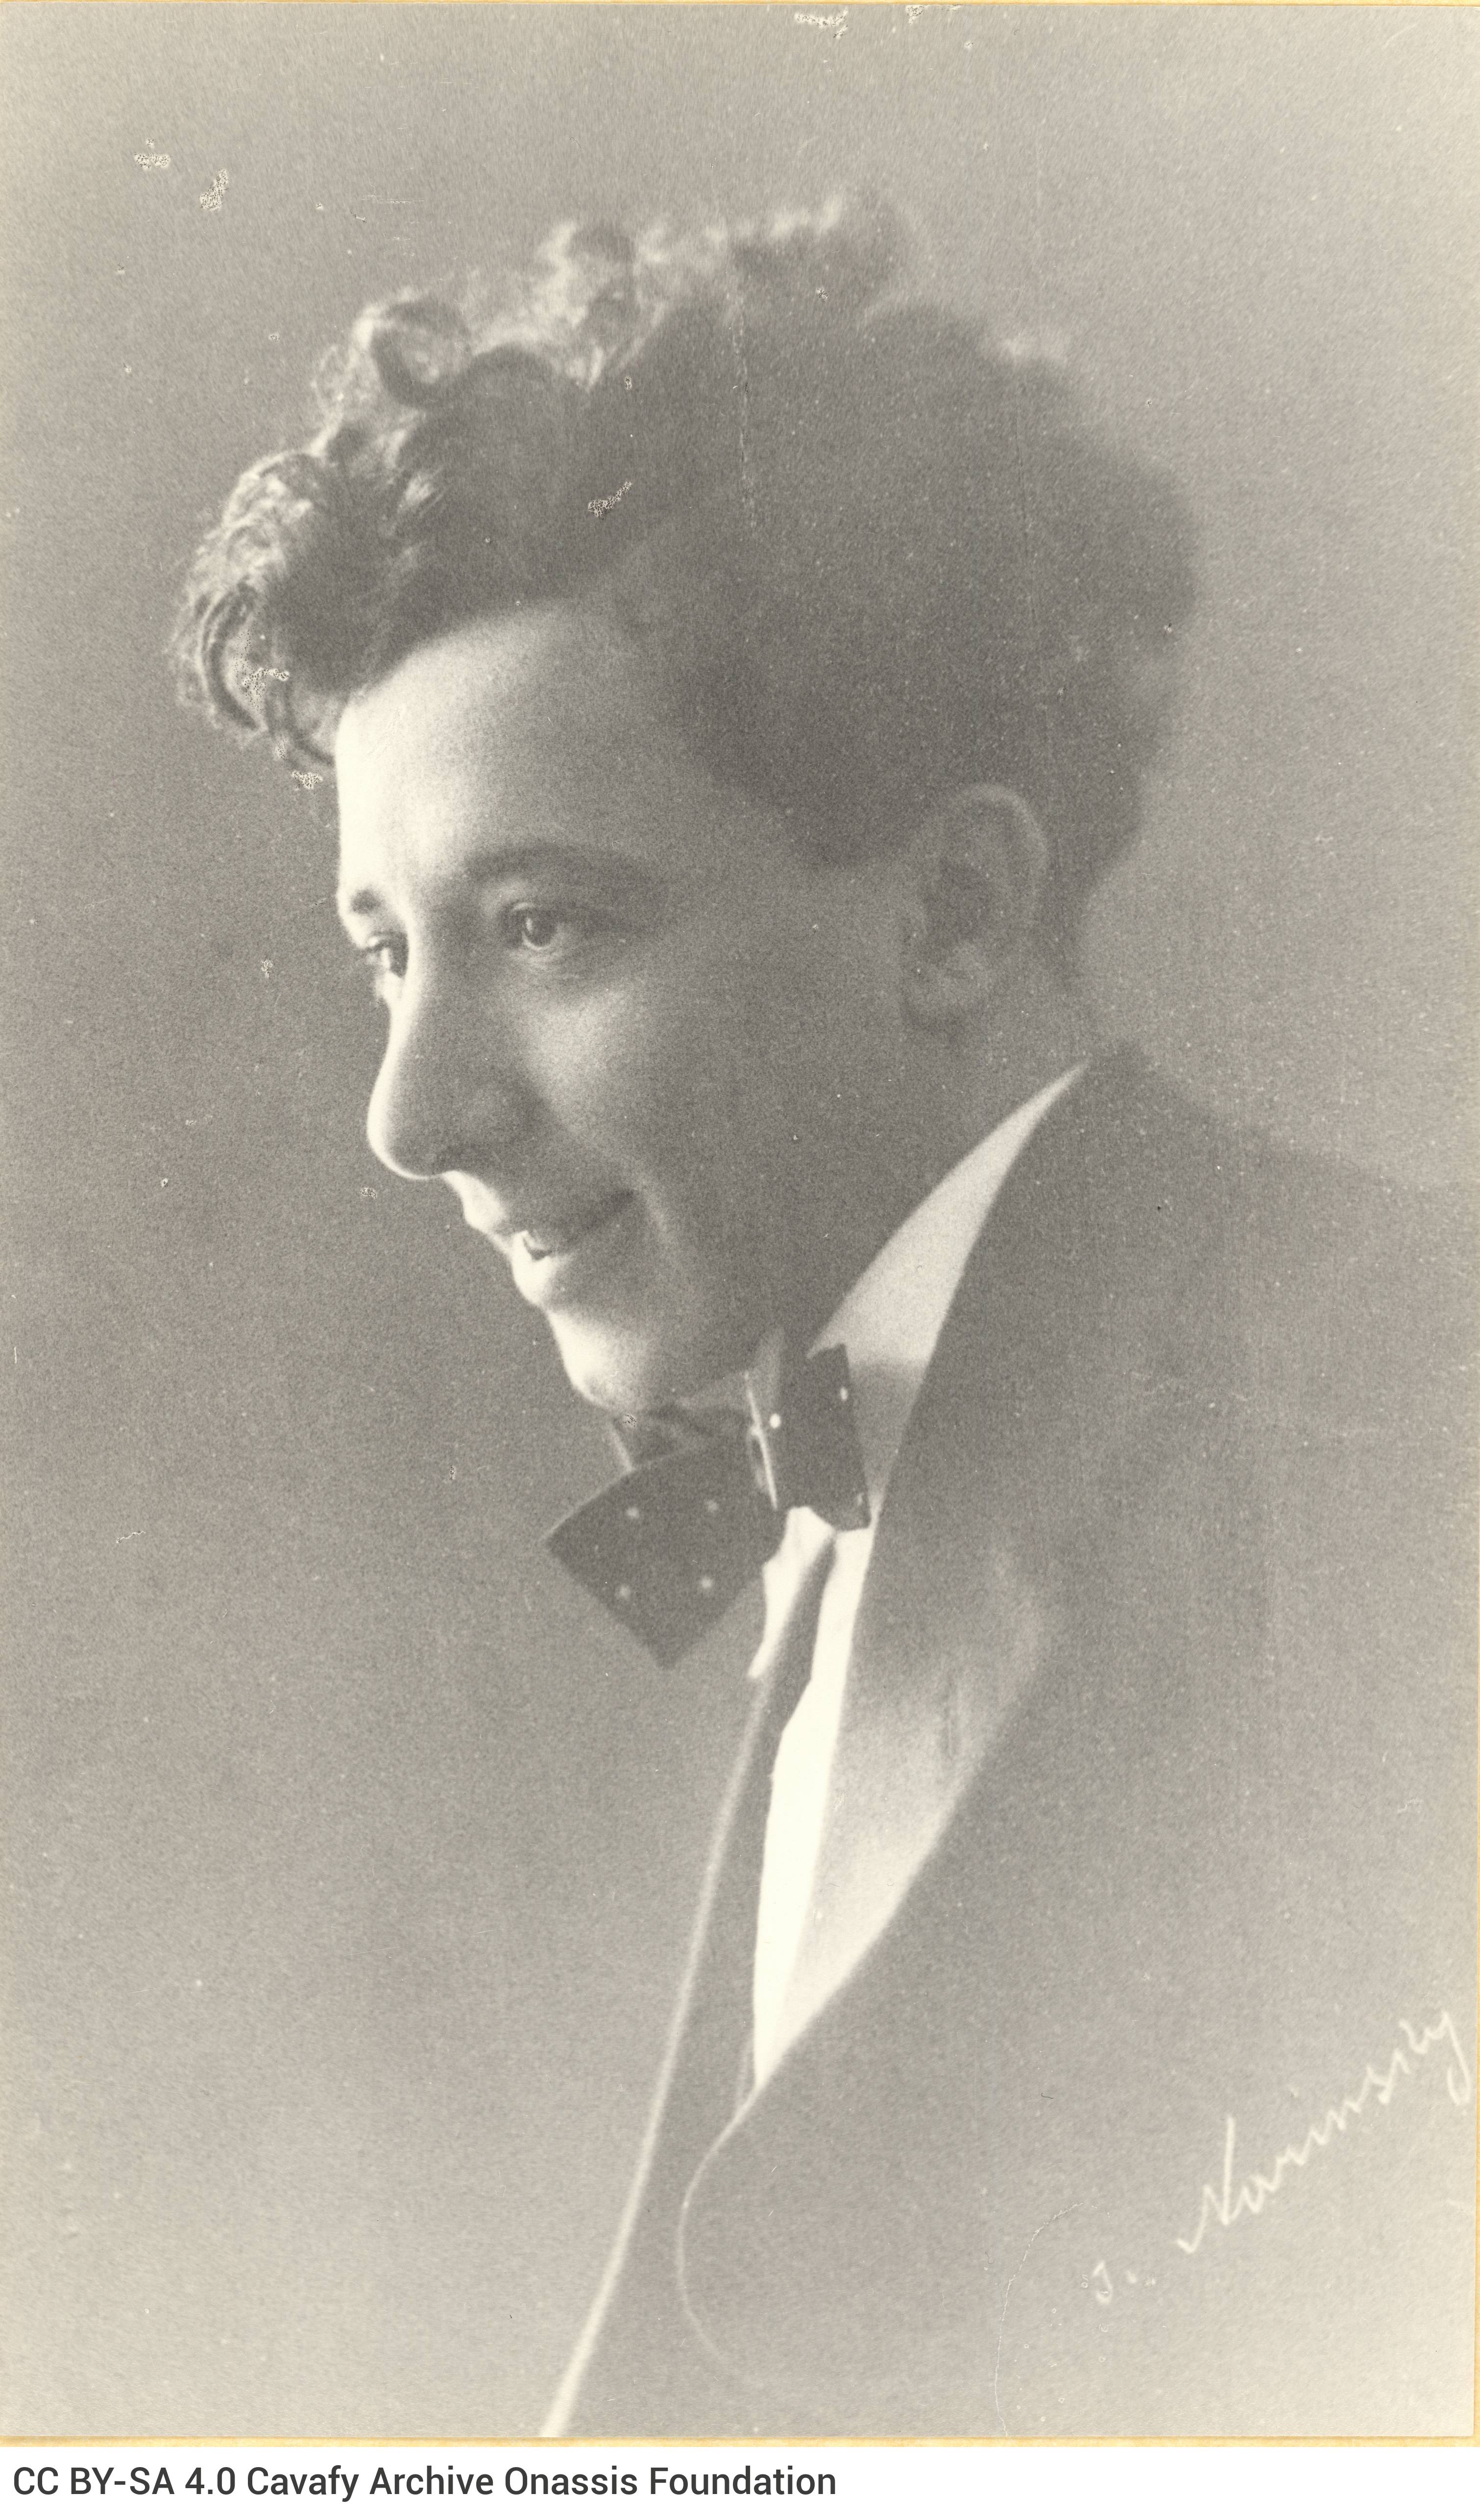 Later enlarged copy of a photograph of Alekos Singopoulo in his youth. He is depicted in profile, smiling, looking to the lef